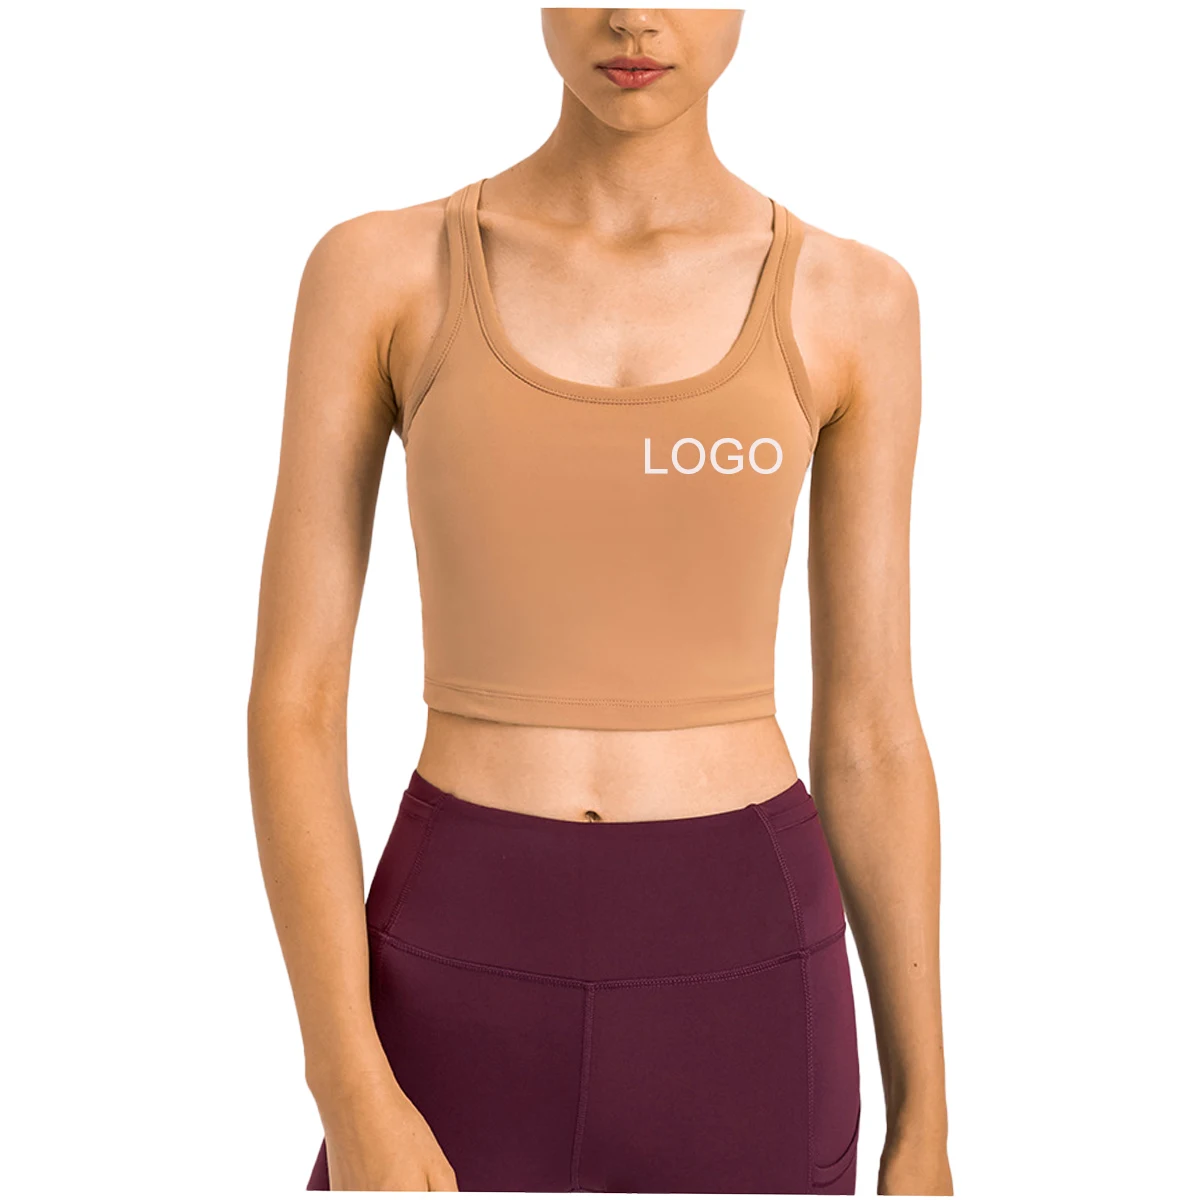 

New Add Colors Gymwear Crop Top Wholesale Blank Yoga Bra Sports Gym Crop Tops Fitness Active Wear With Removable Pads For Women